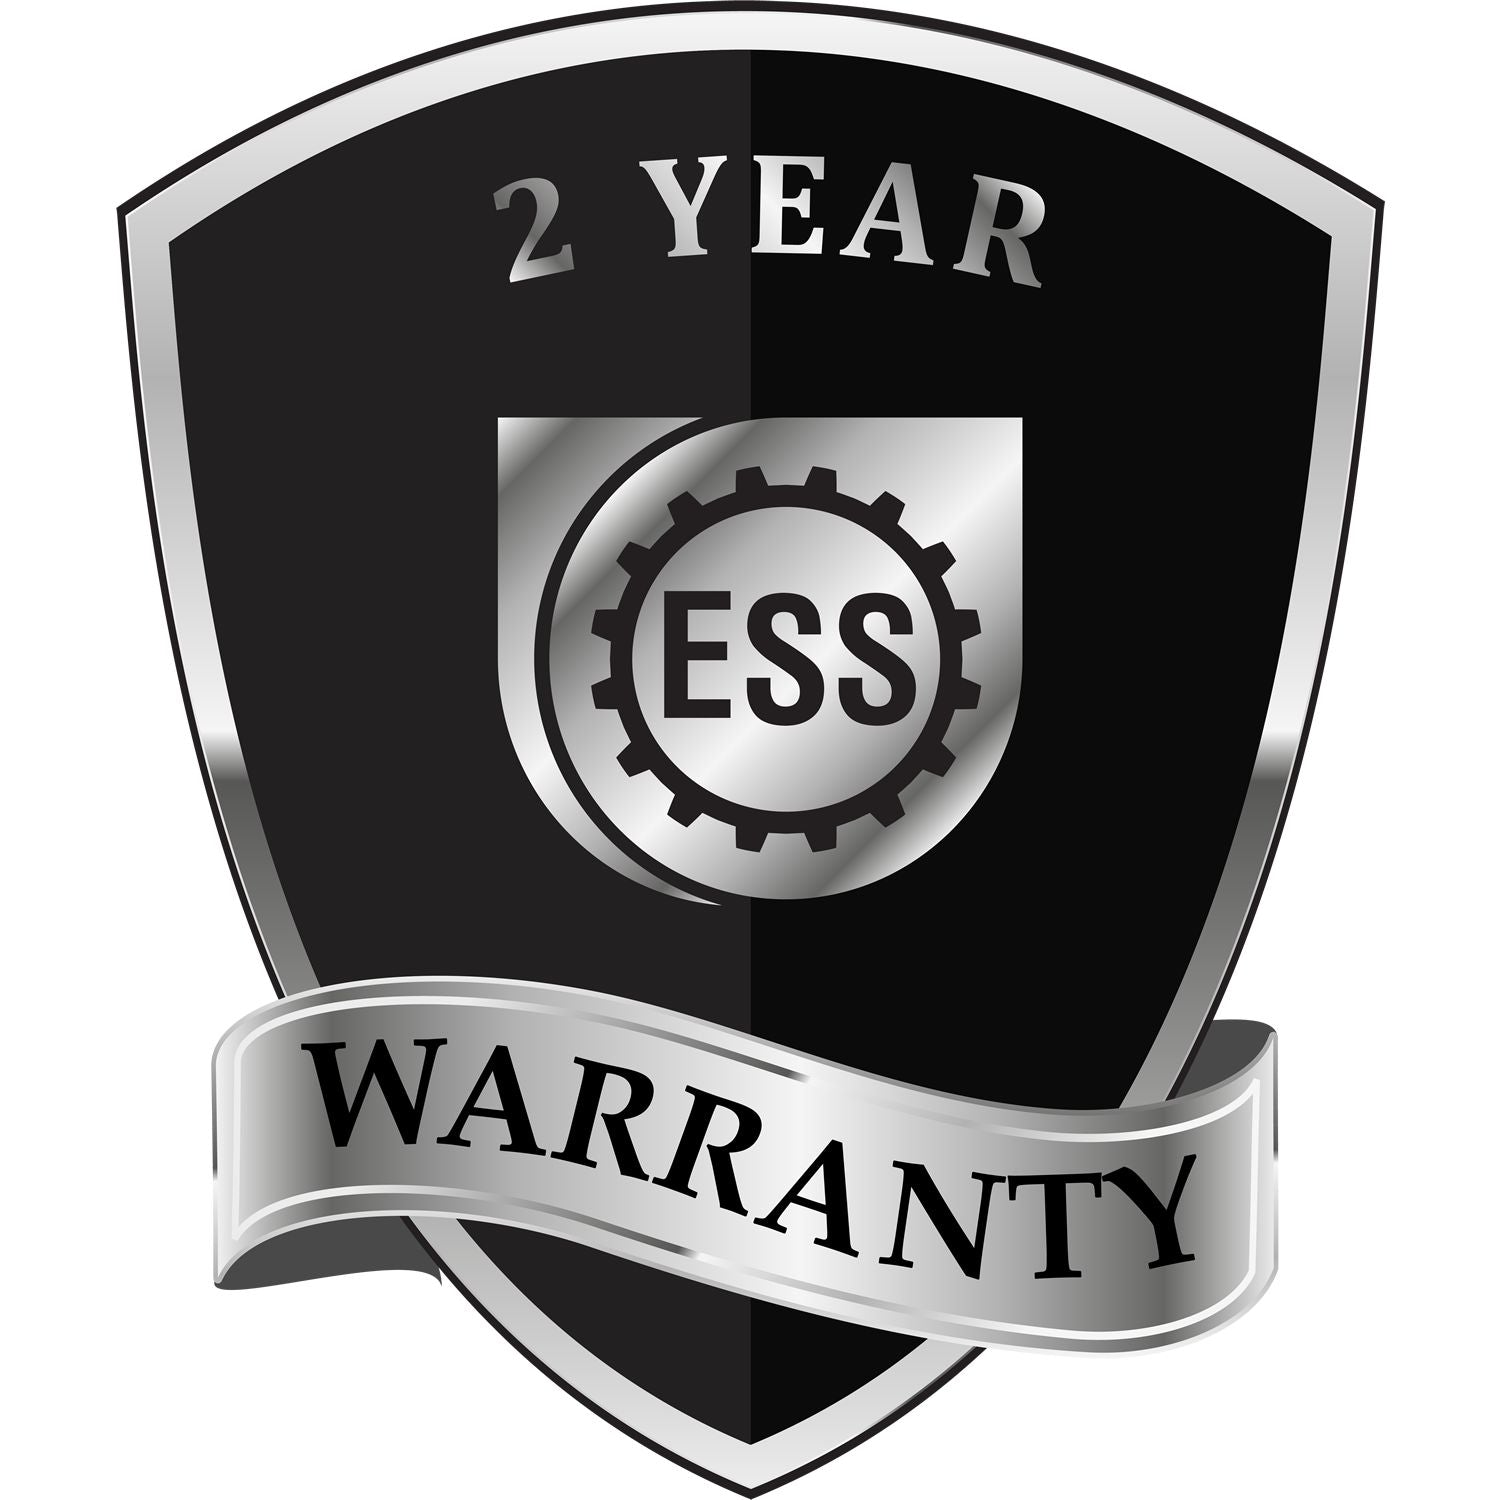 A badge or emblem showing a warranty icon for the Heavy Duty Cast Iron Arkansas Architect Embosser